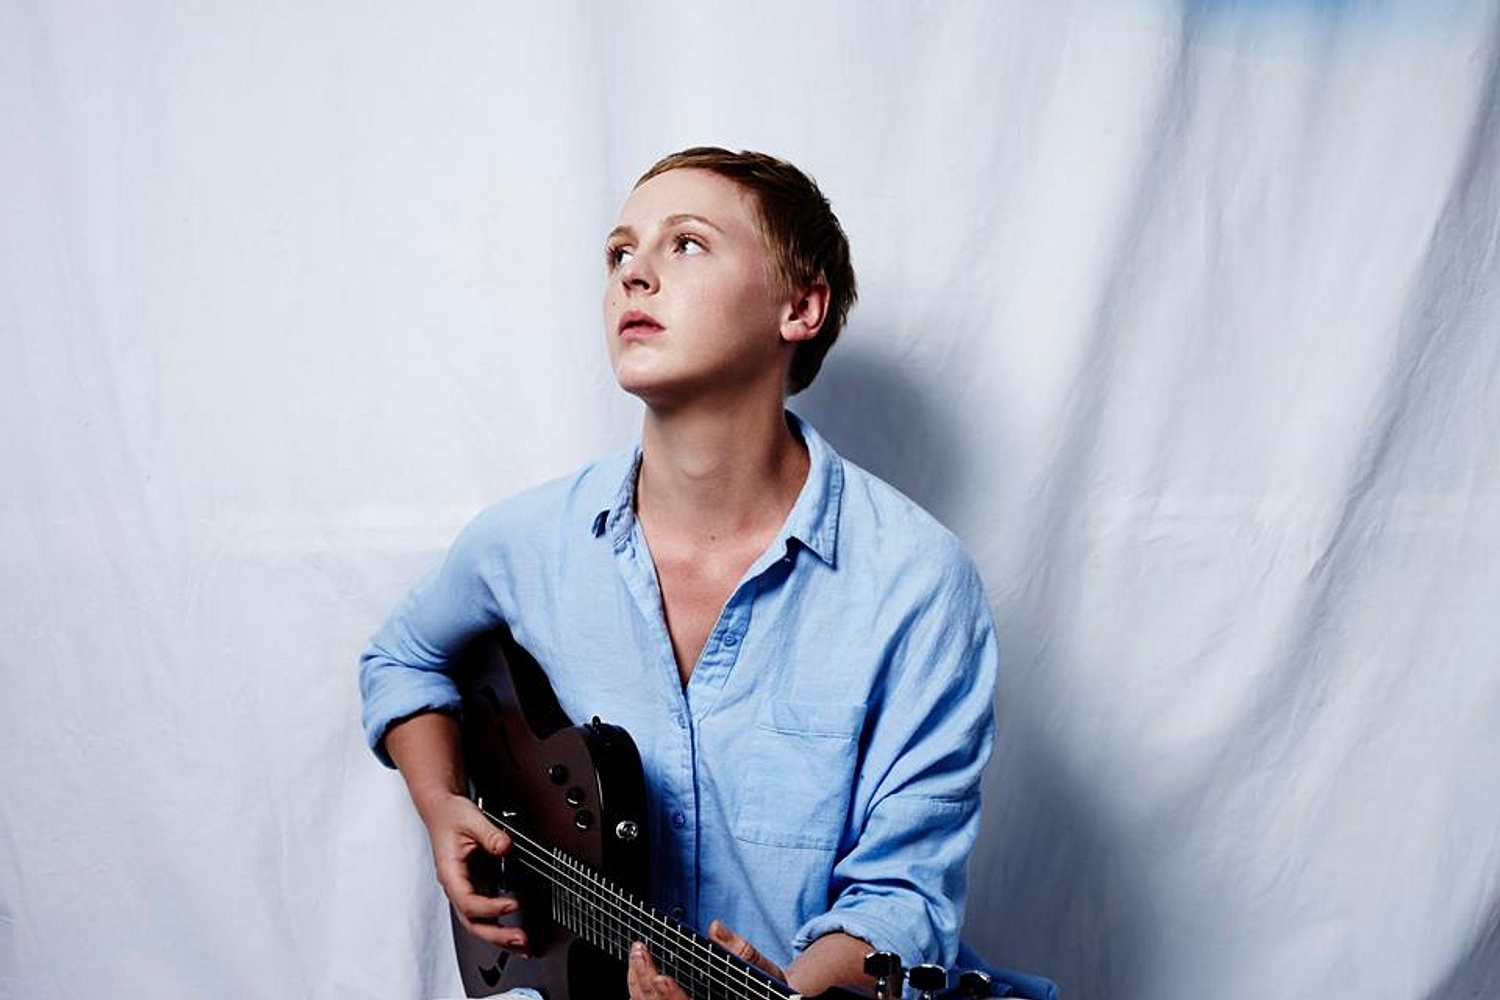 Watch Laura Marling debut new ‘Strange’ song at London’s Silver Bullet